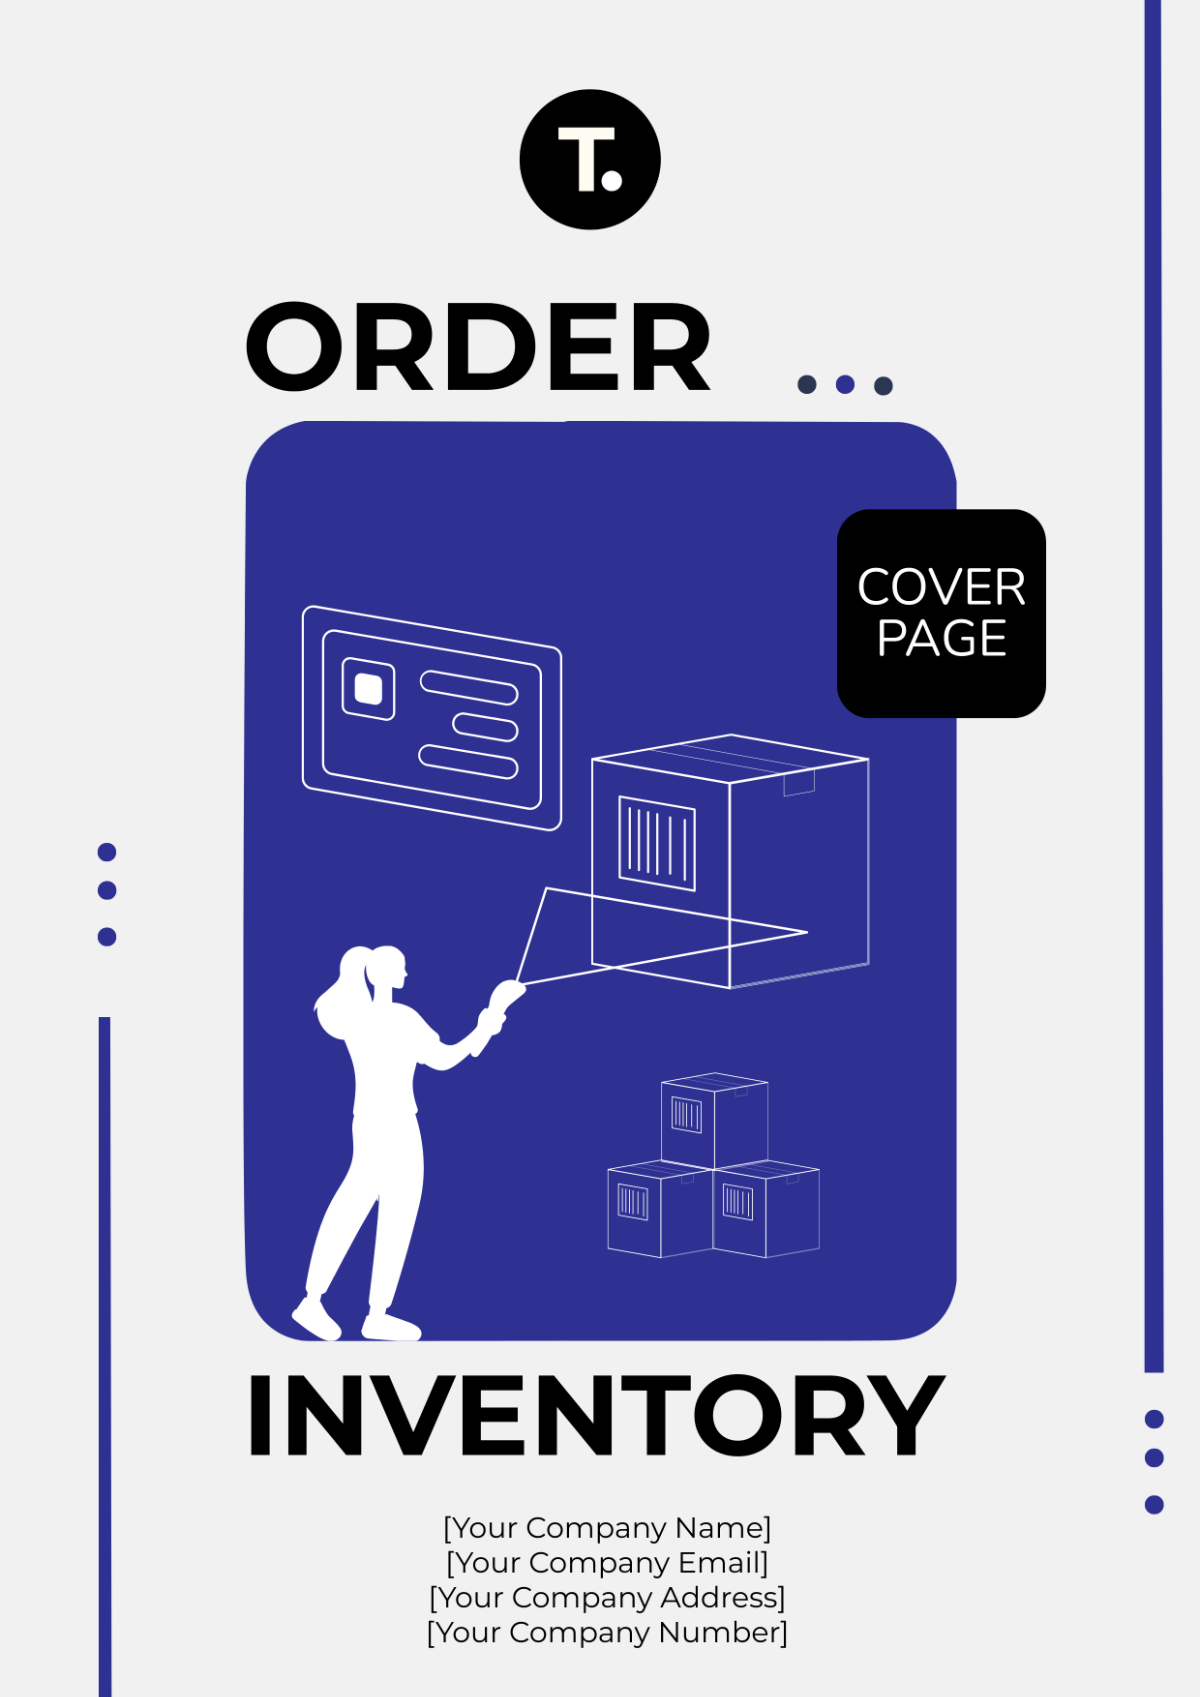 Order Inventory Cover Page